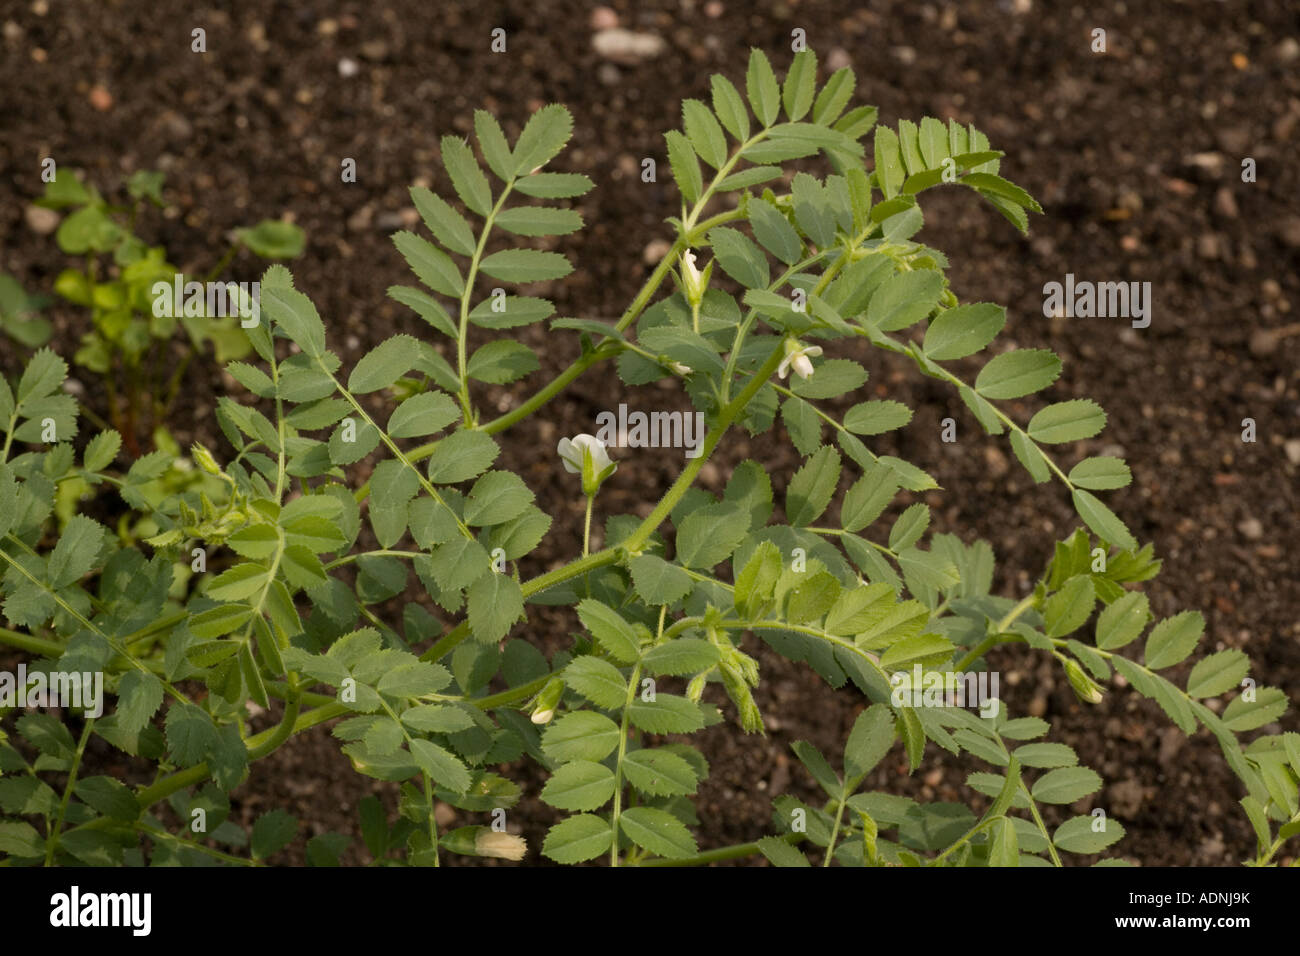 Chick pea in flower Cicer arietinum Widespread crop in warmer parts of the world Stock Photo